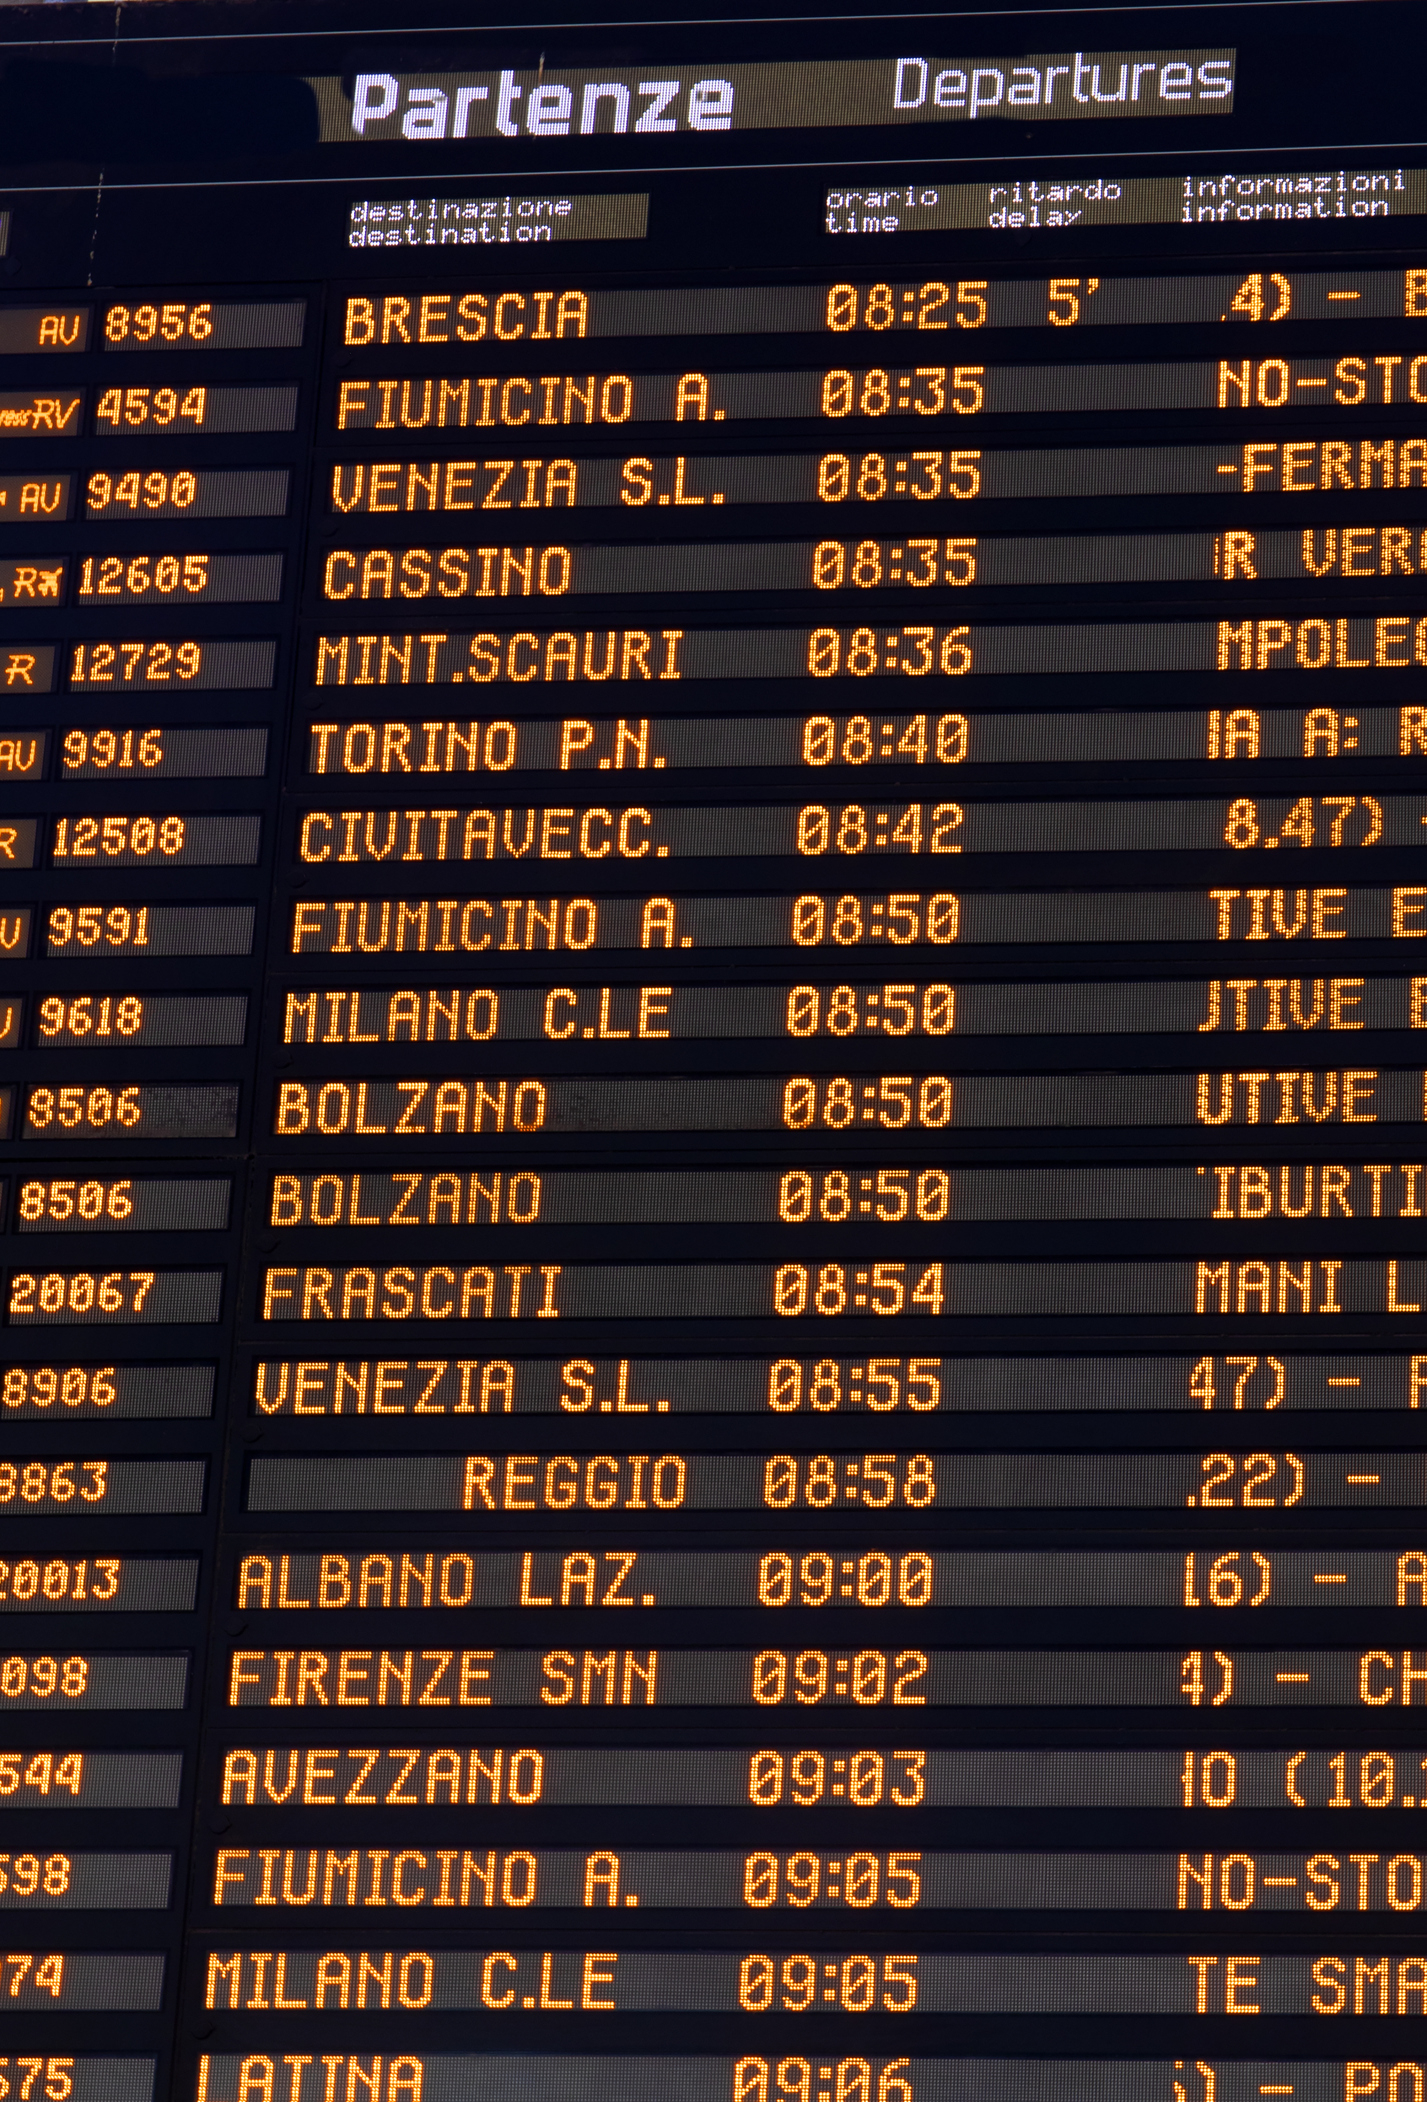 Departure board displaying various Italian destinations like Brescia, Venezia, and Milano with times ranging from 08:25 to 09:05